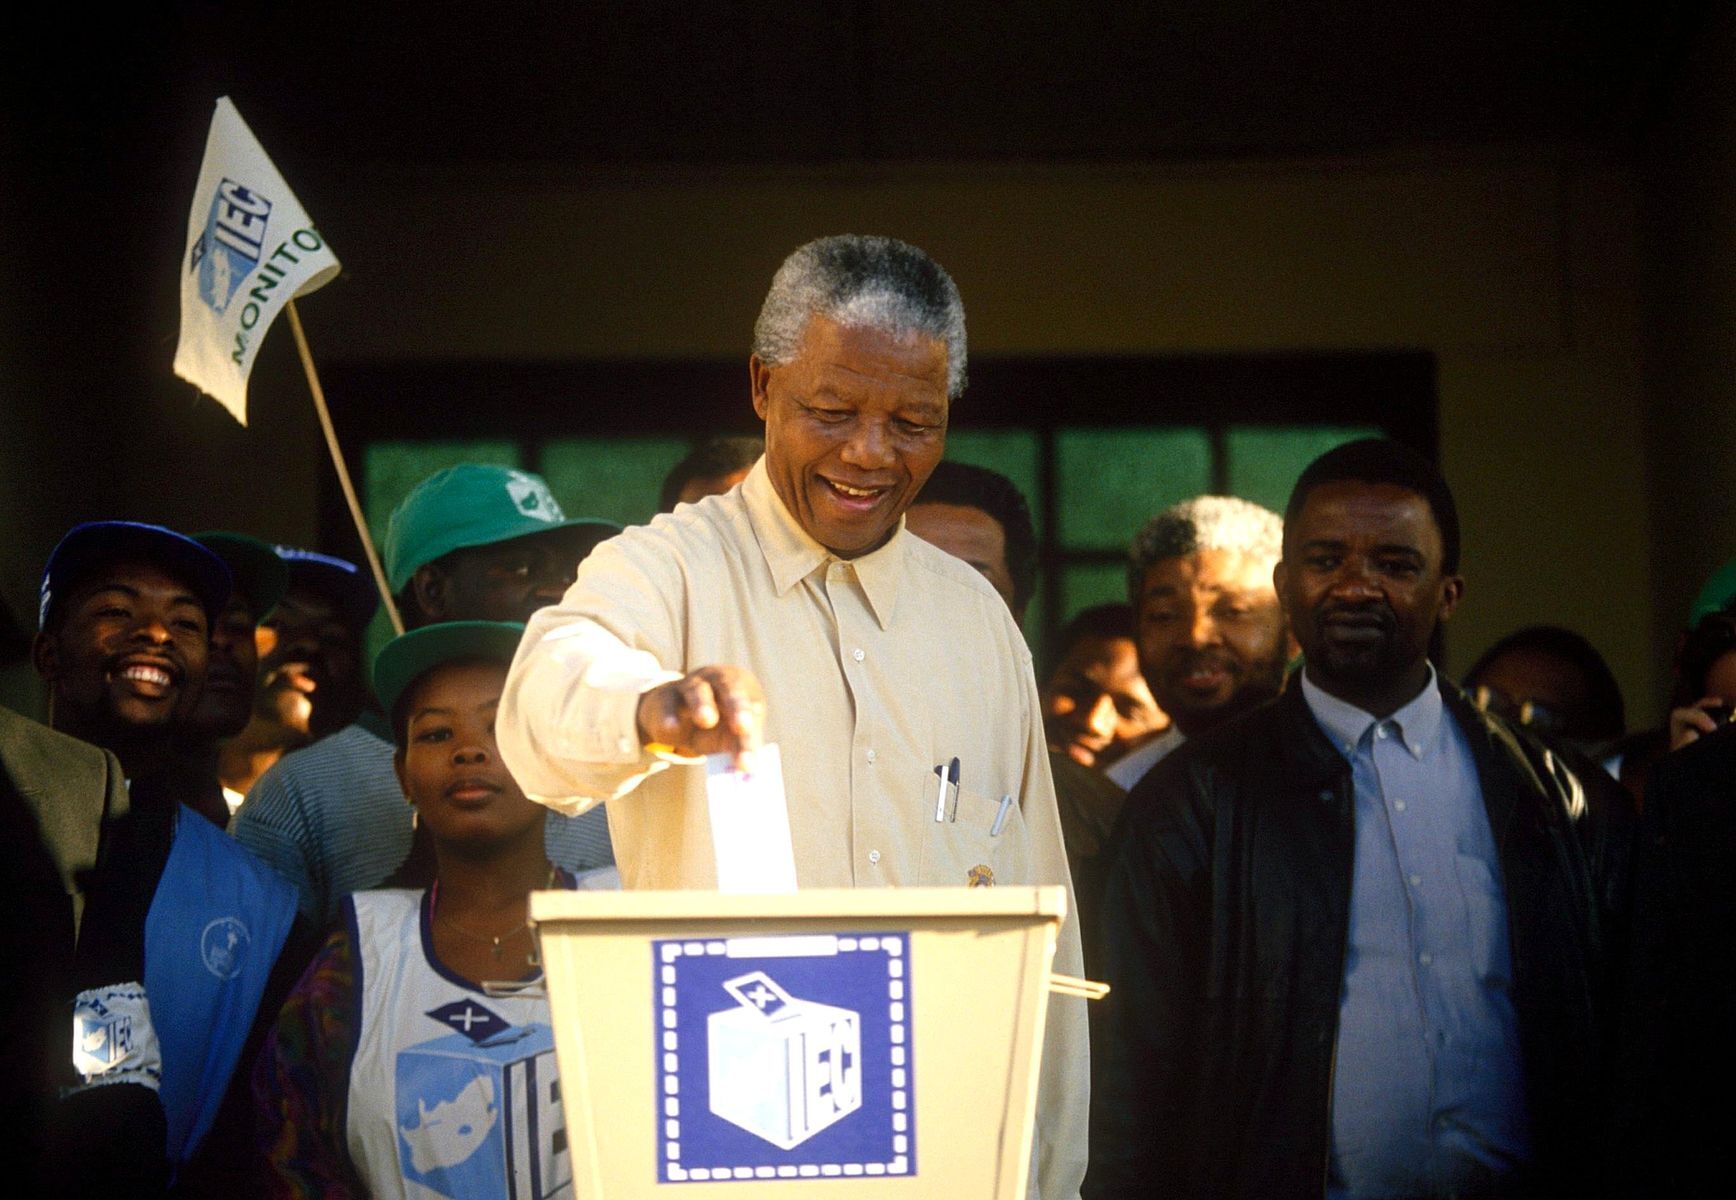 <p>In April 1994, the <a href="https://www.apartheidmuseum.org/exhibitions/1994-election" rel="noreferrer noopener">ANC won the country’s first free, multiracial elections</a>. Mandela became president of the republic. He then worked to heal the wounds of the past, applying the <a href="https://www.facinghistory.org/confronting-apartheid/chapter-3/mandelas-strategic-decision" rel="noreferrer noopener">concept of ubuntu, an African philosophy of respectful, compassionate coexistence</a>. <a href="https://www.bbc.com/news/business-23041513" rel="noreferrer noopener">Improving black economic power</a>, however, has since proven difficult.</p>